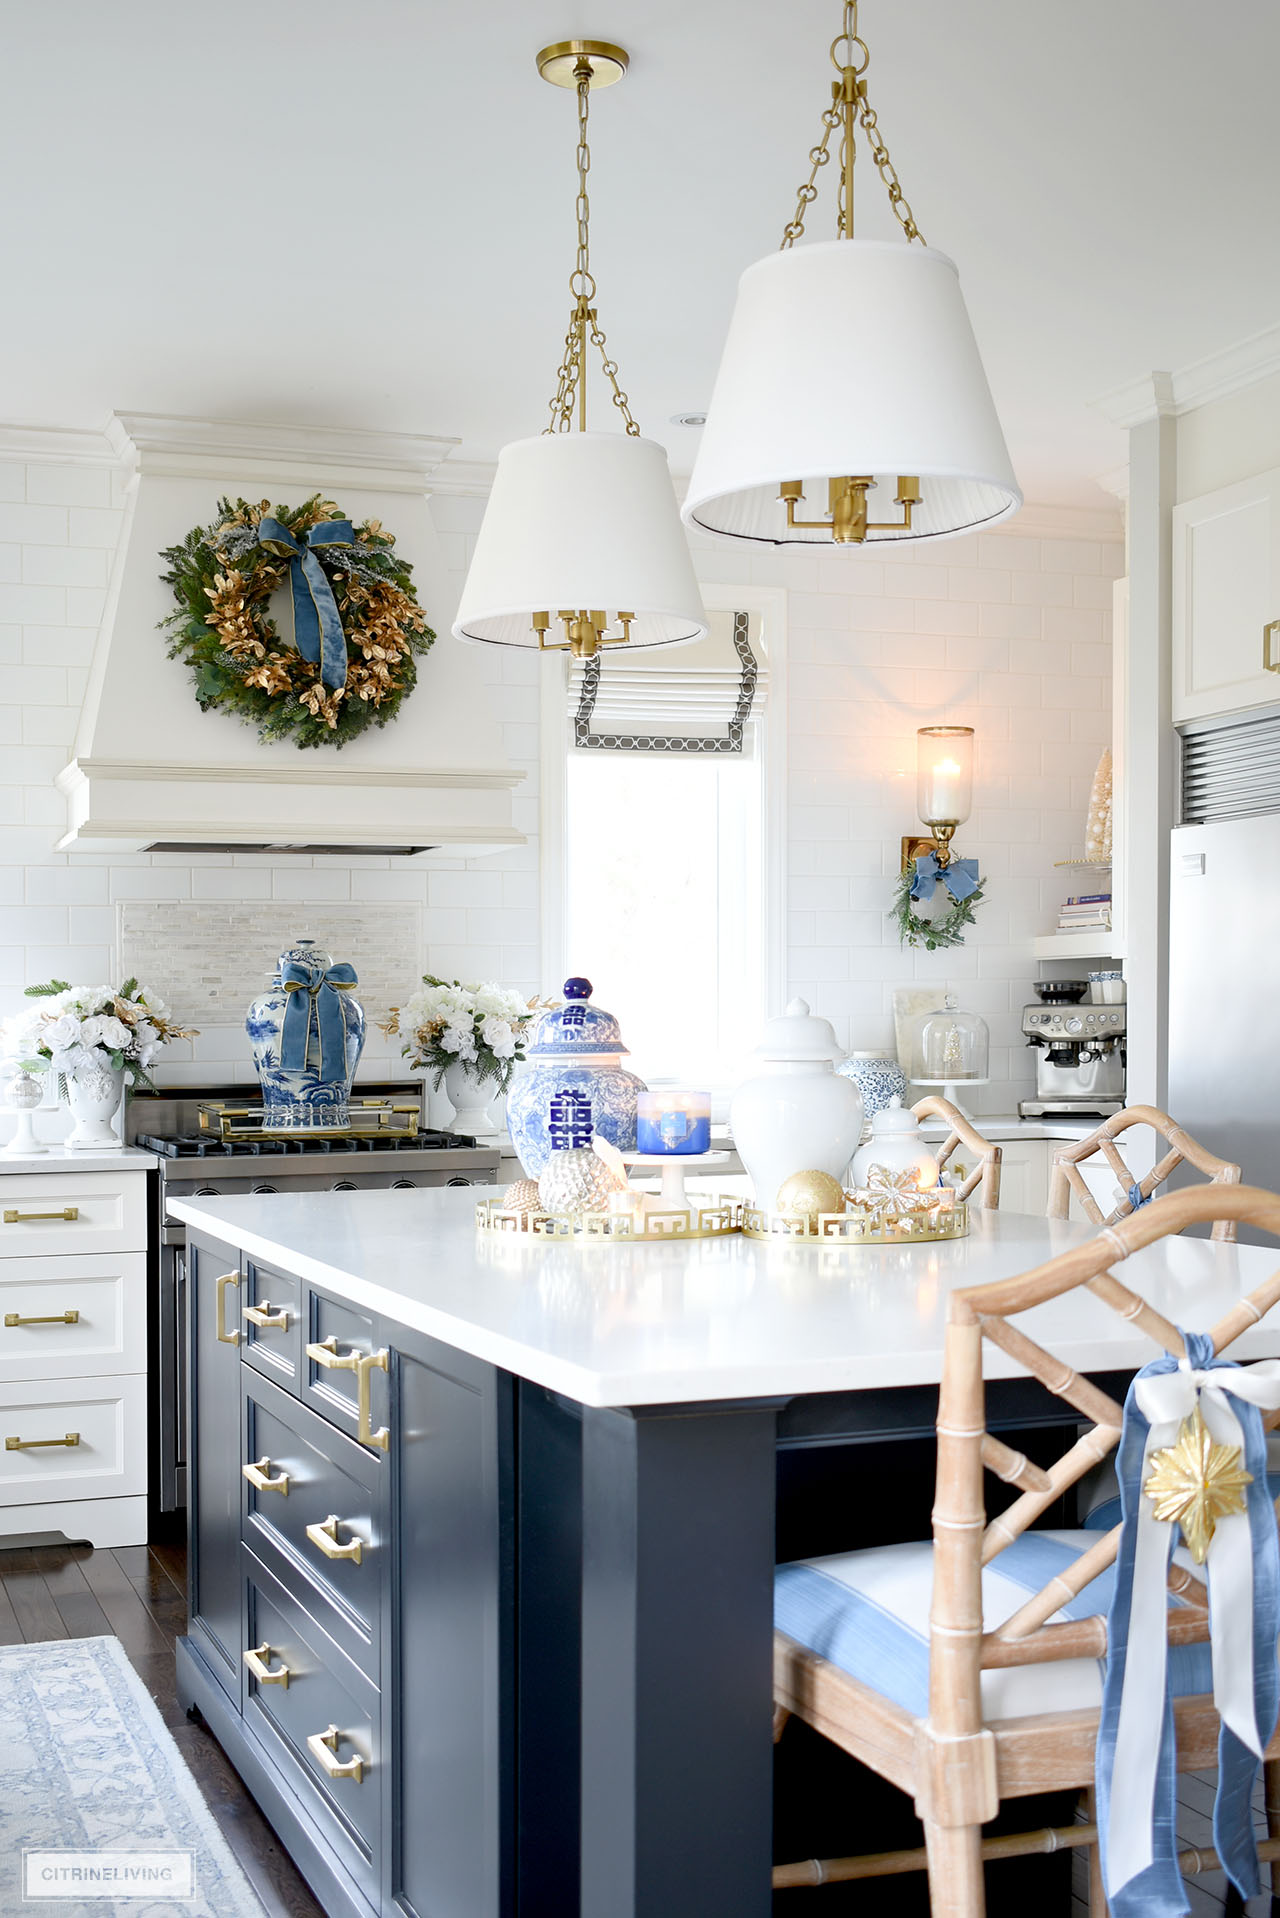 Black kitchen island with gold hardware styled for Christmas with gold trays, candles and ginger jars.